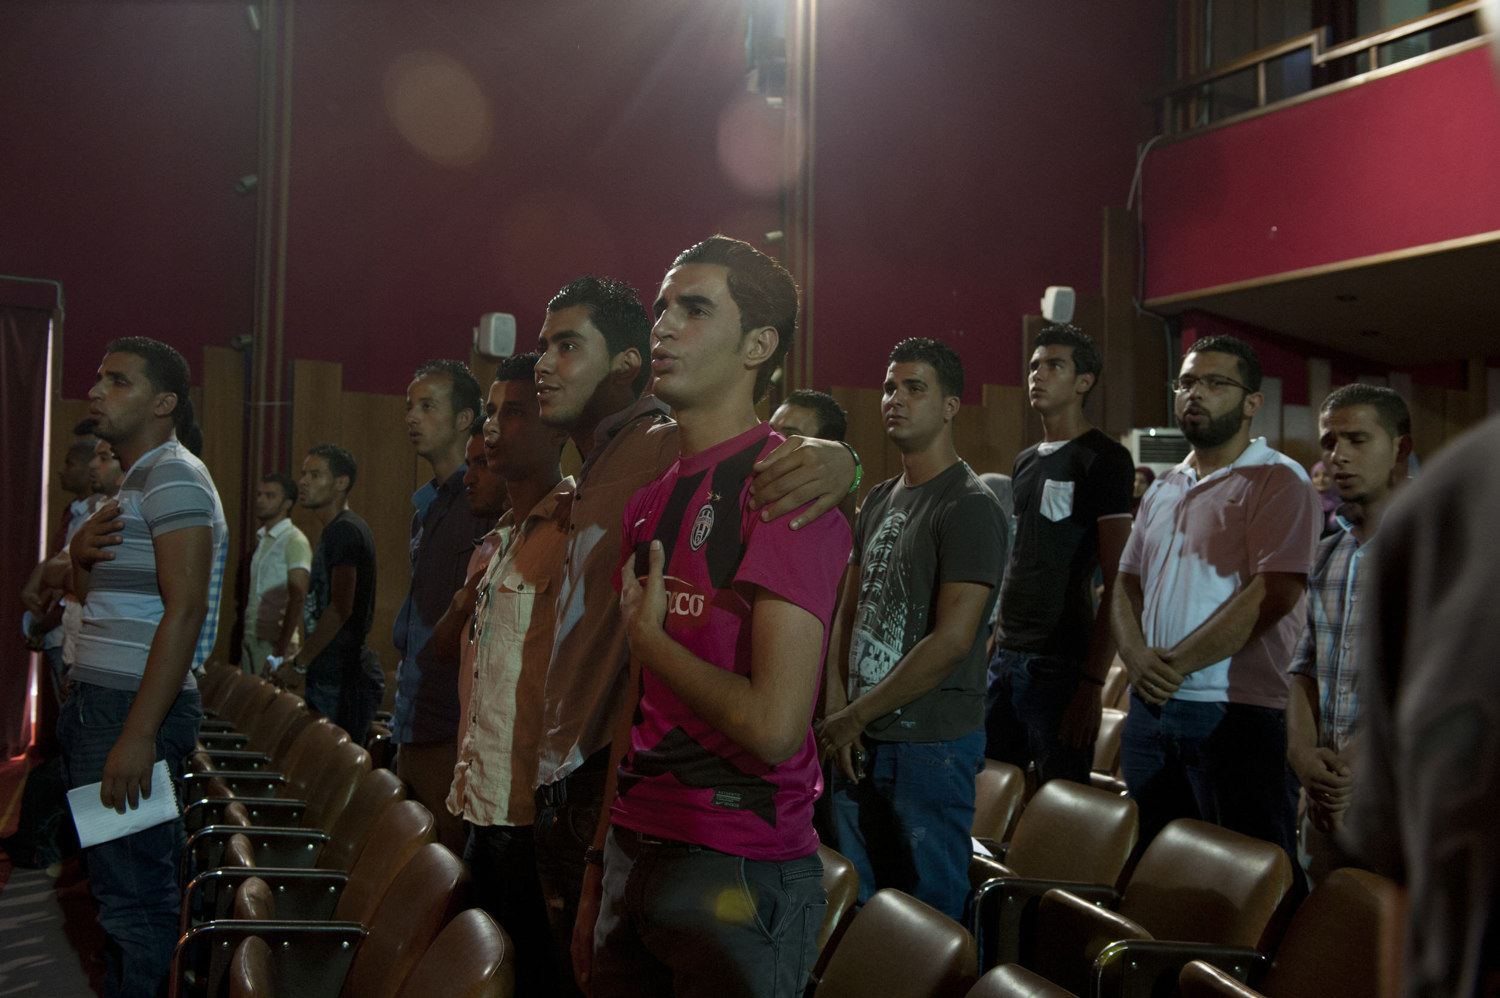  Students at Tripoli University sing the national anthem and attend a meeting of the elected Student Council on July 12th 2012.

 